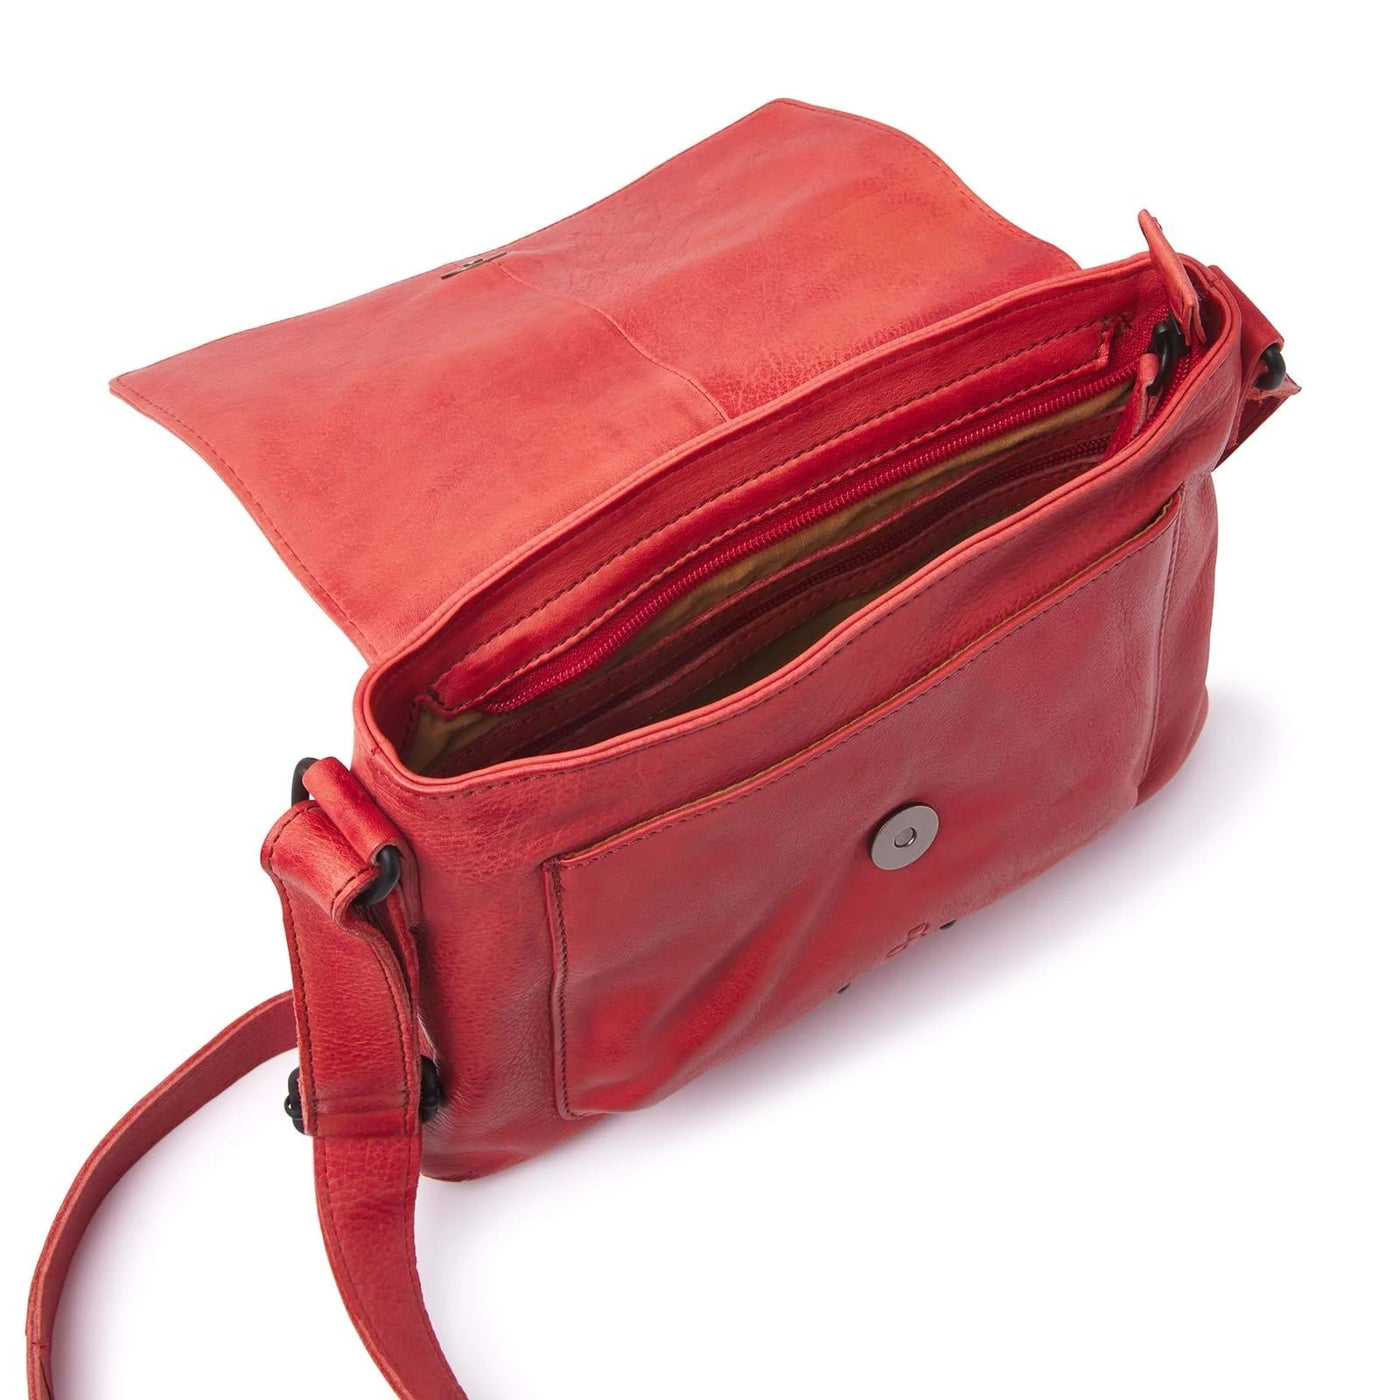 D.R. Amsterdam - Leather Crossbody Bag in Red